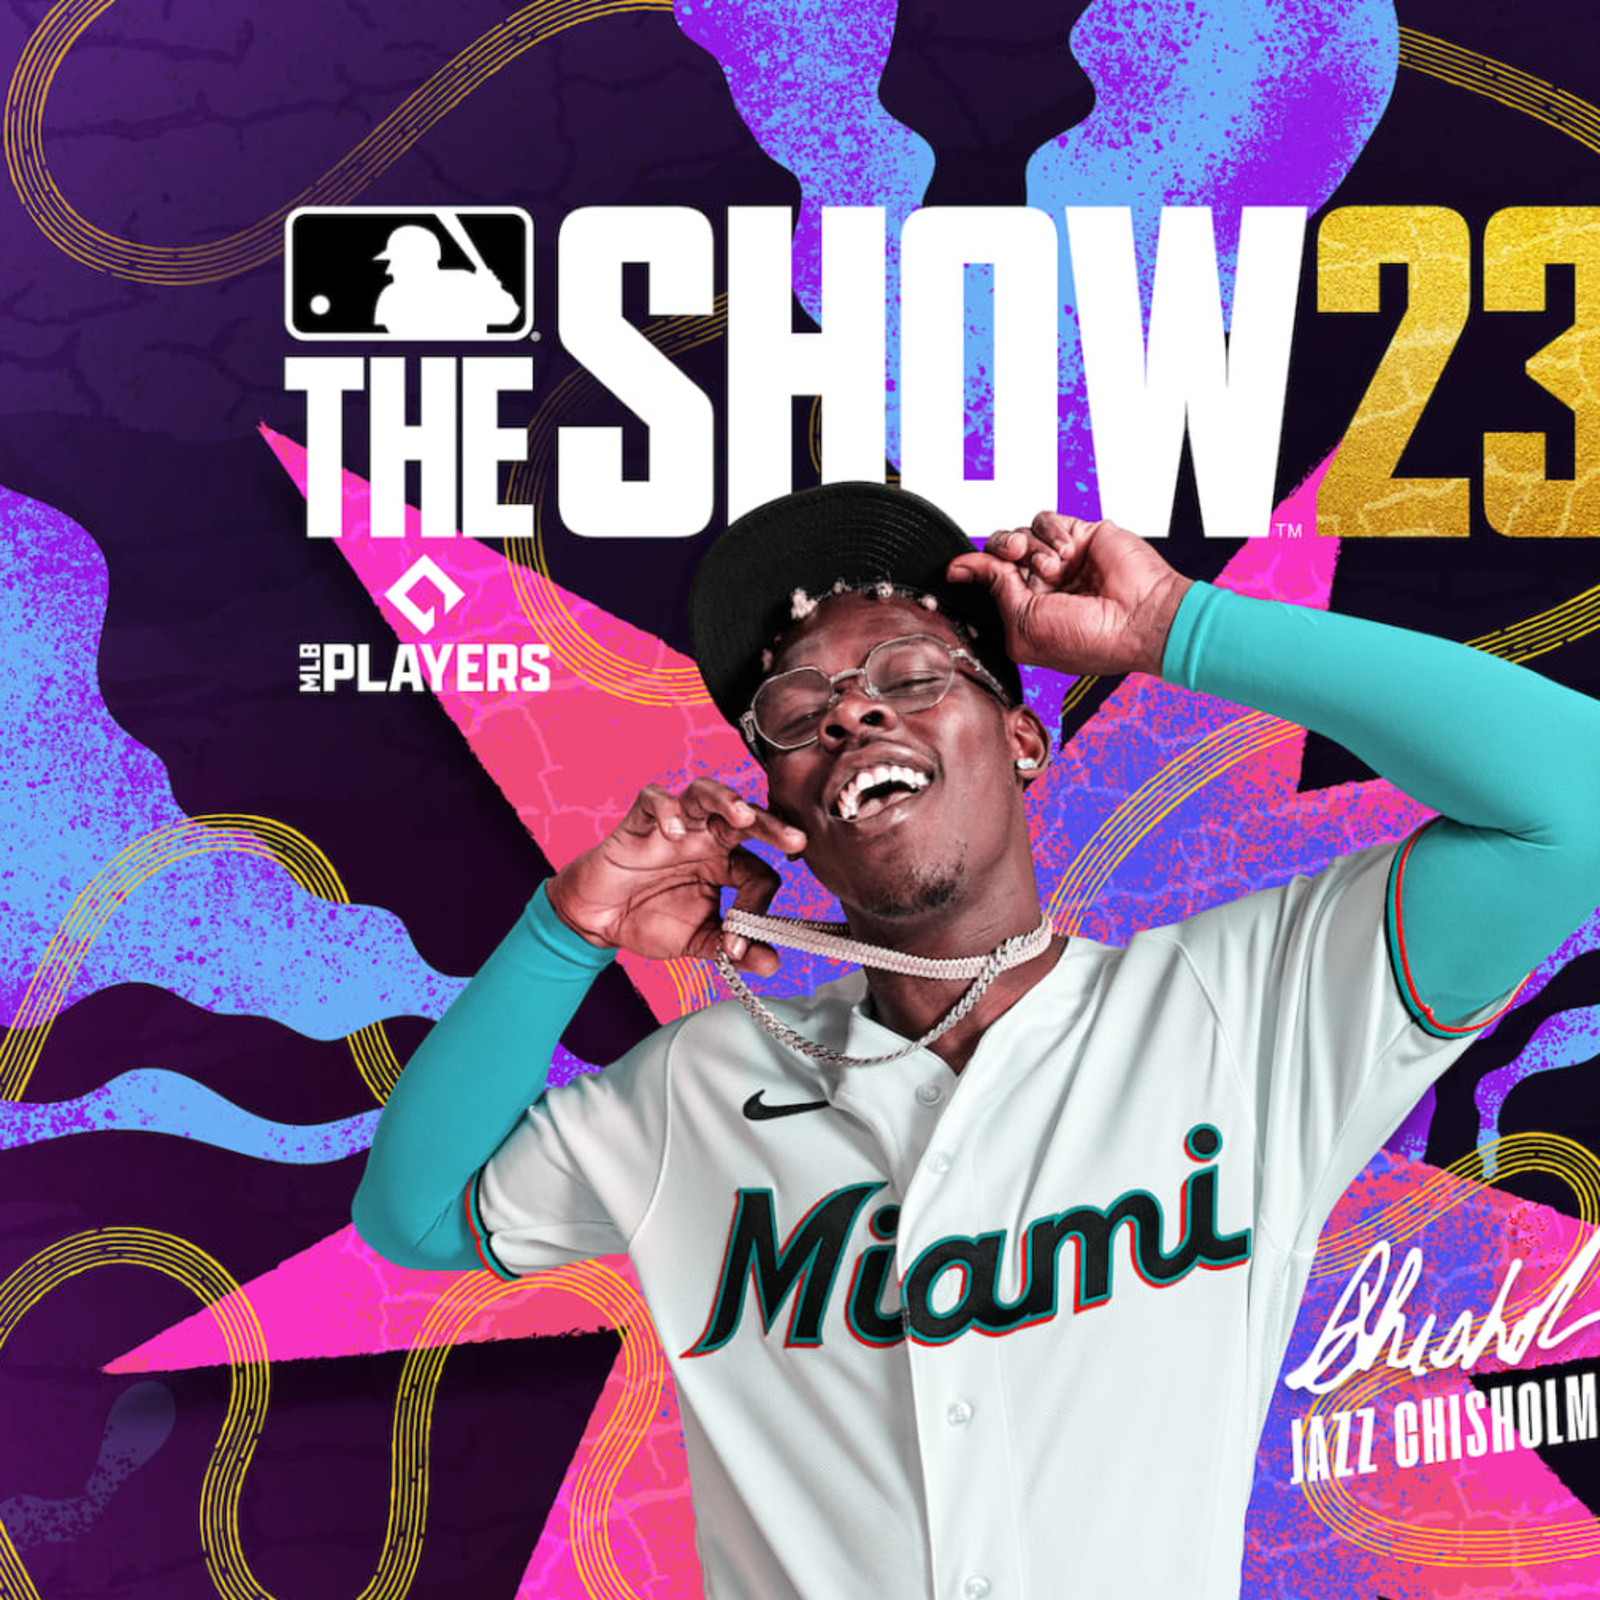 MLB The Show '23 cover athlete is Marlins' Jazz Chisholm